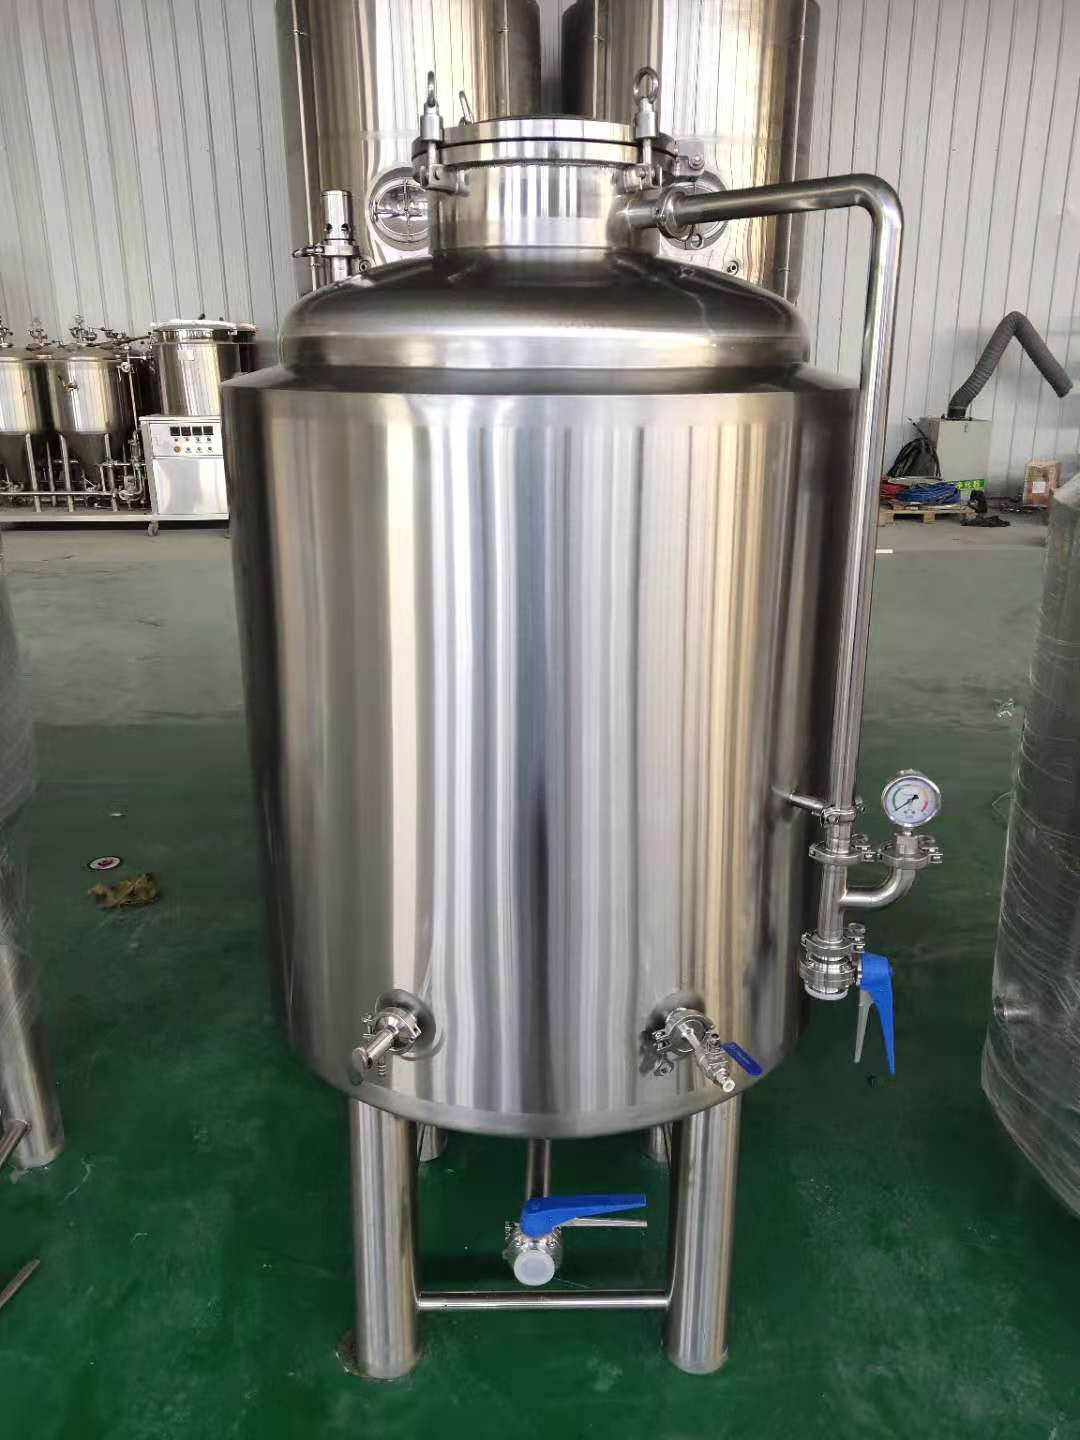 Flange Manhole Bright Beer Tanks With Good Quality